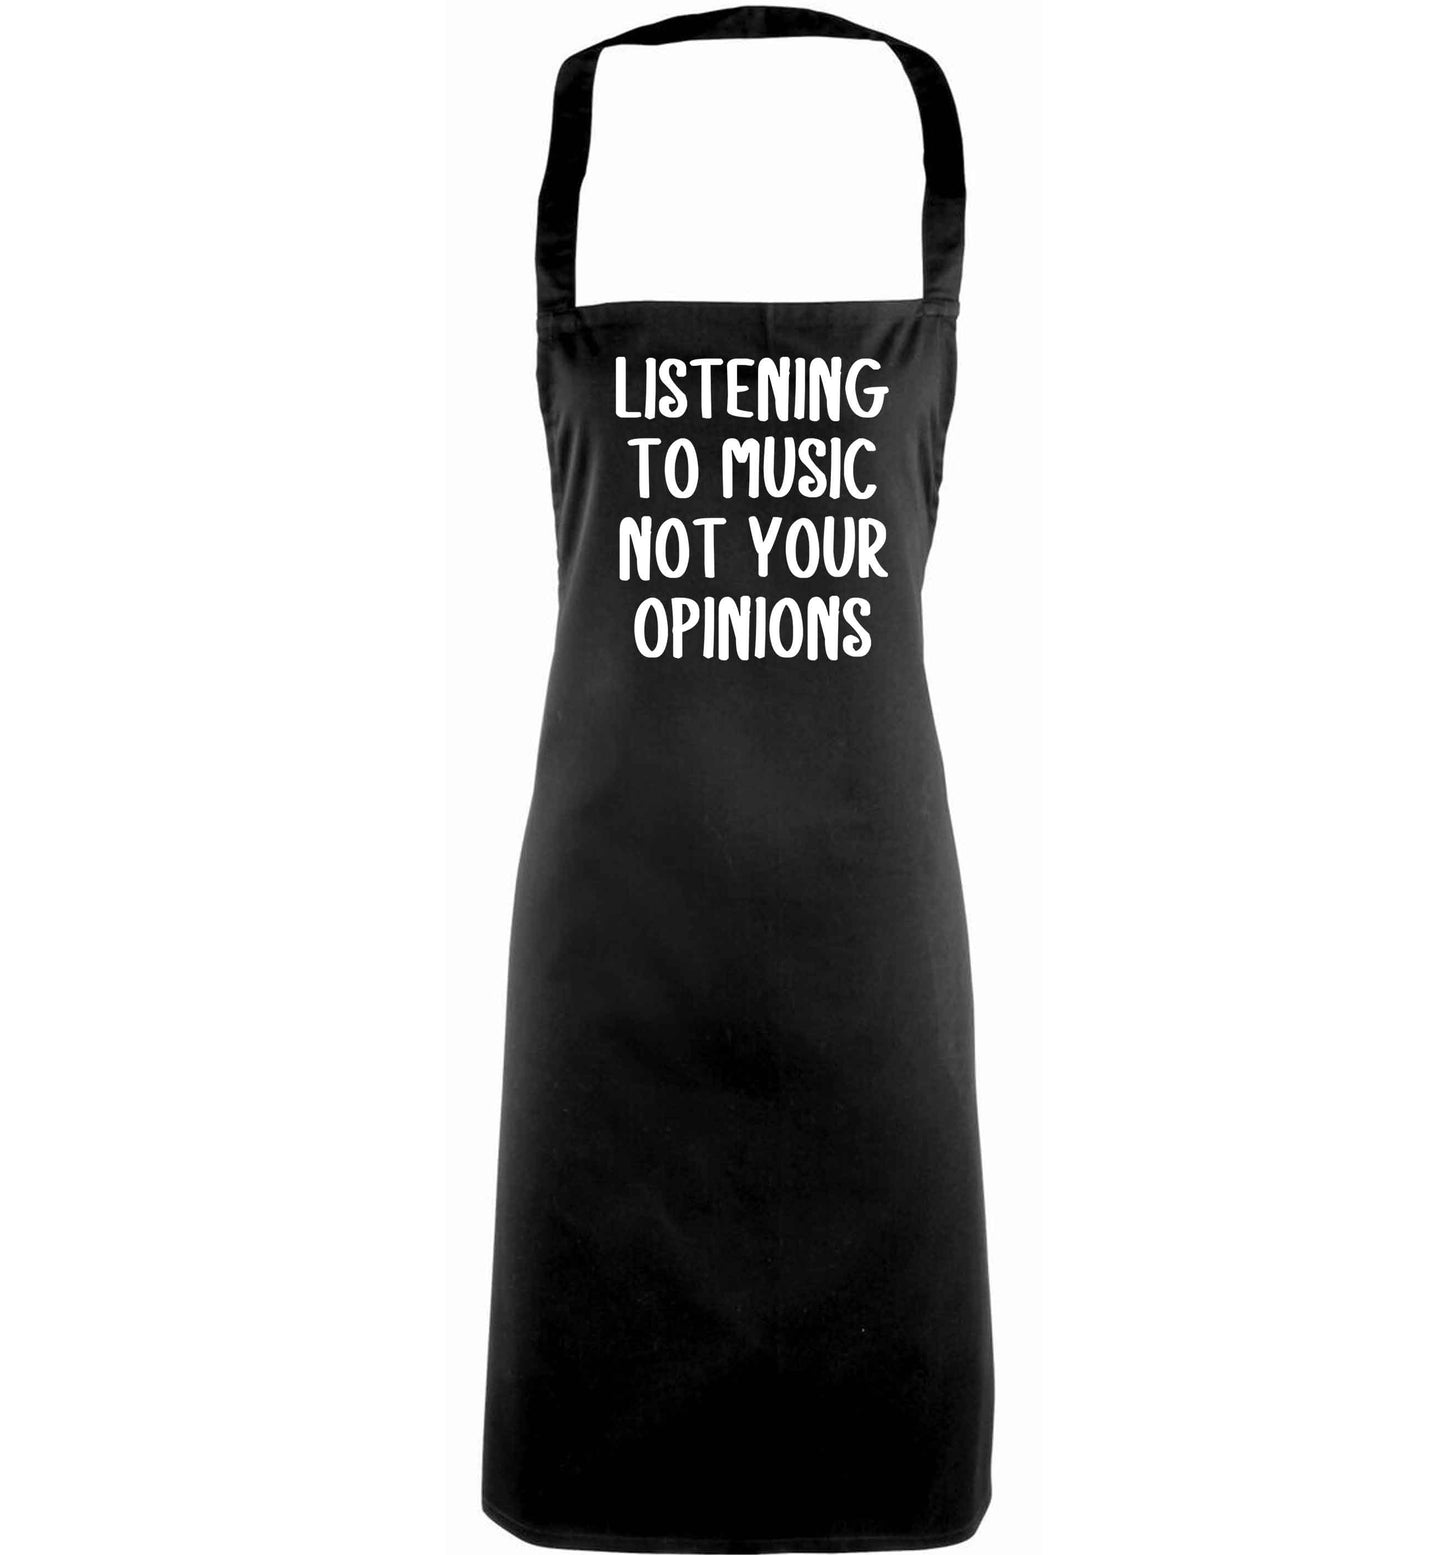 Listening to music not your opinions adults black apron